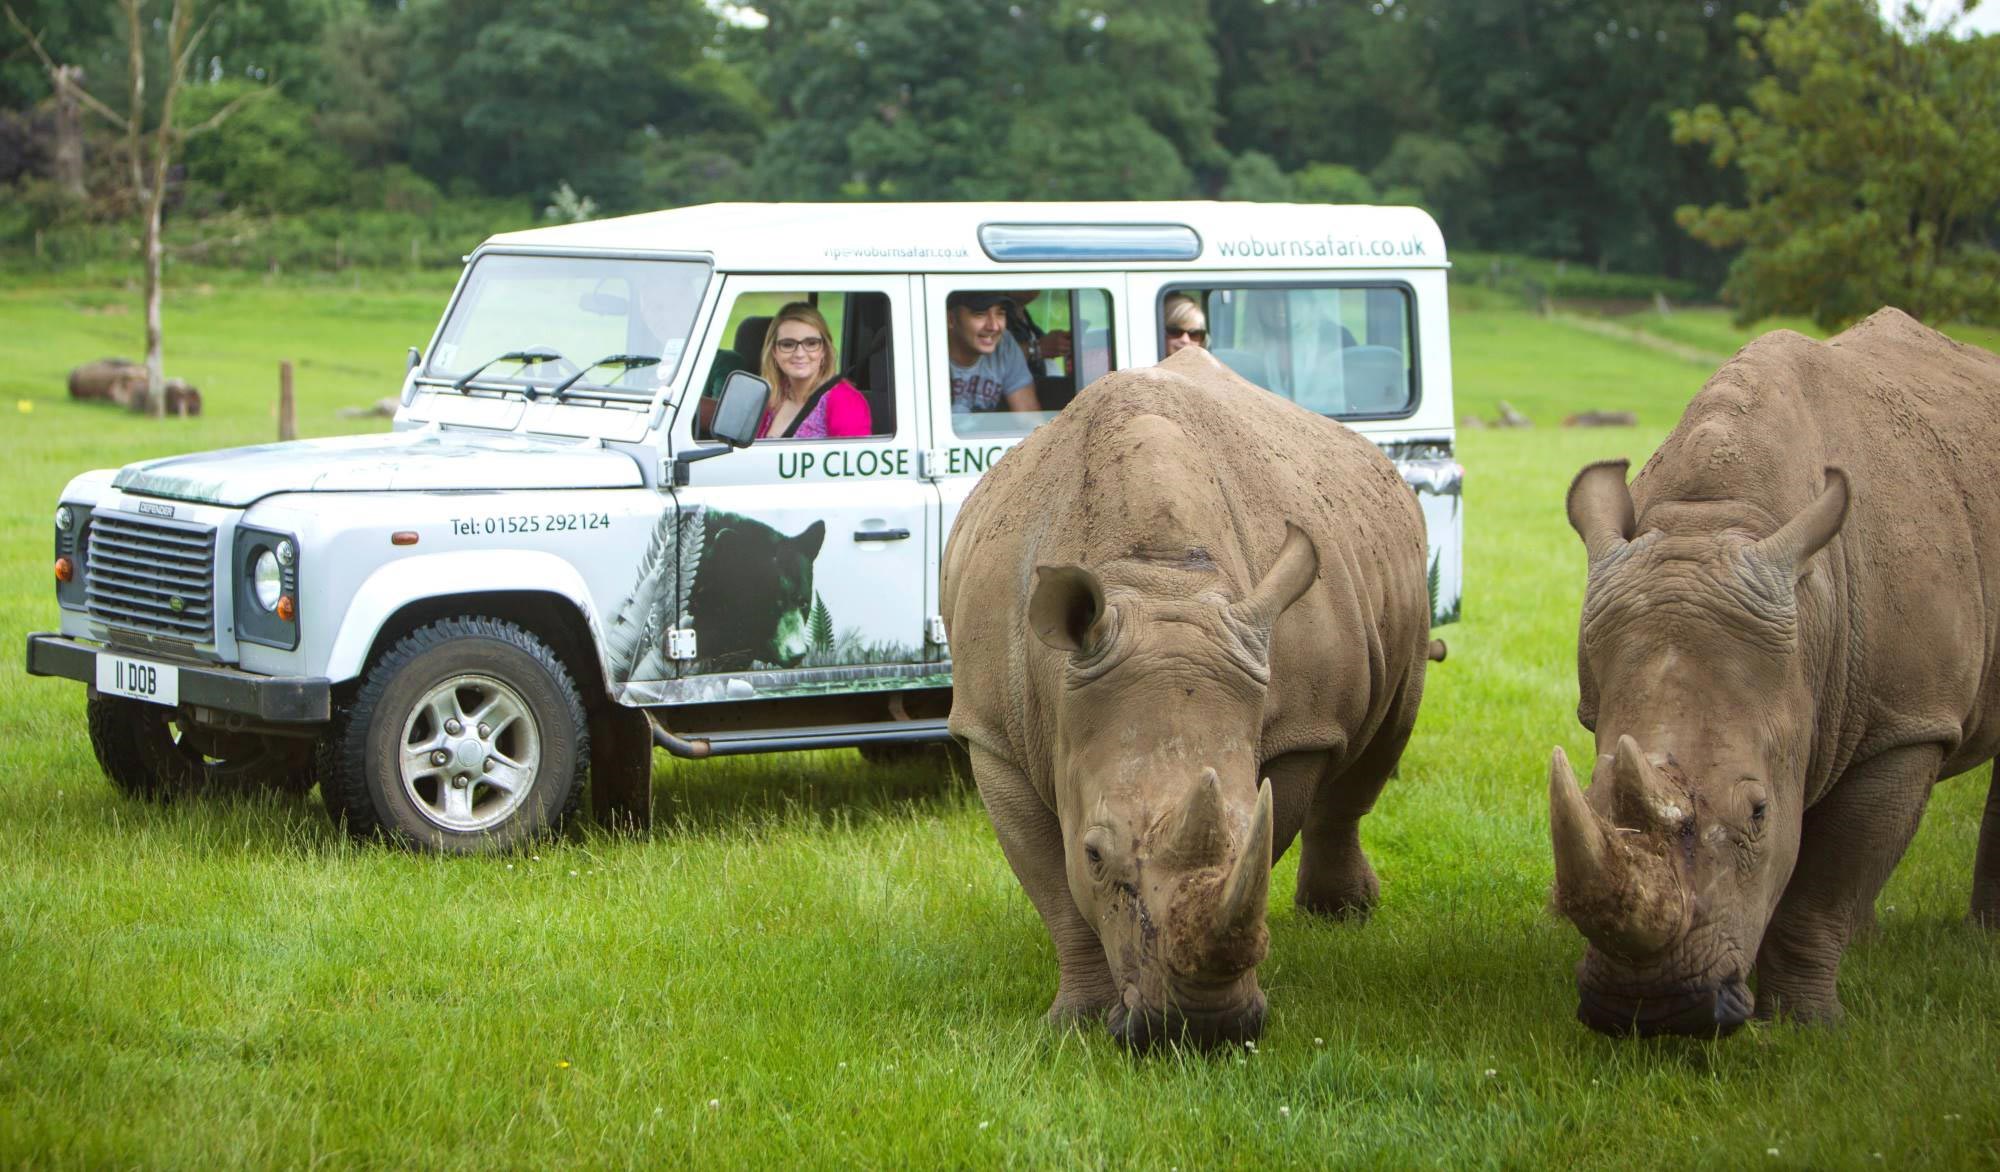 Two rhinos graze in grassy enclosure near safari VIP vehicle while guests watch them excitedly 